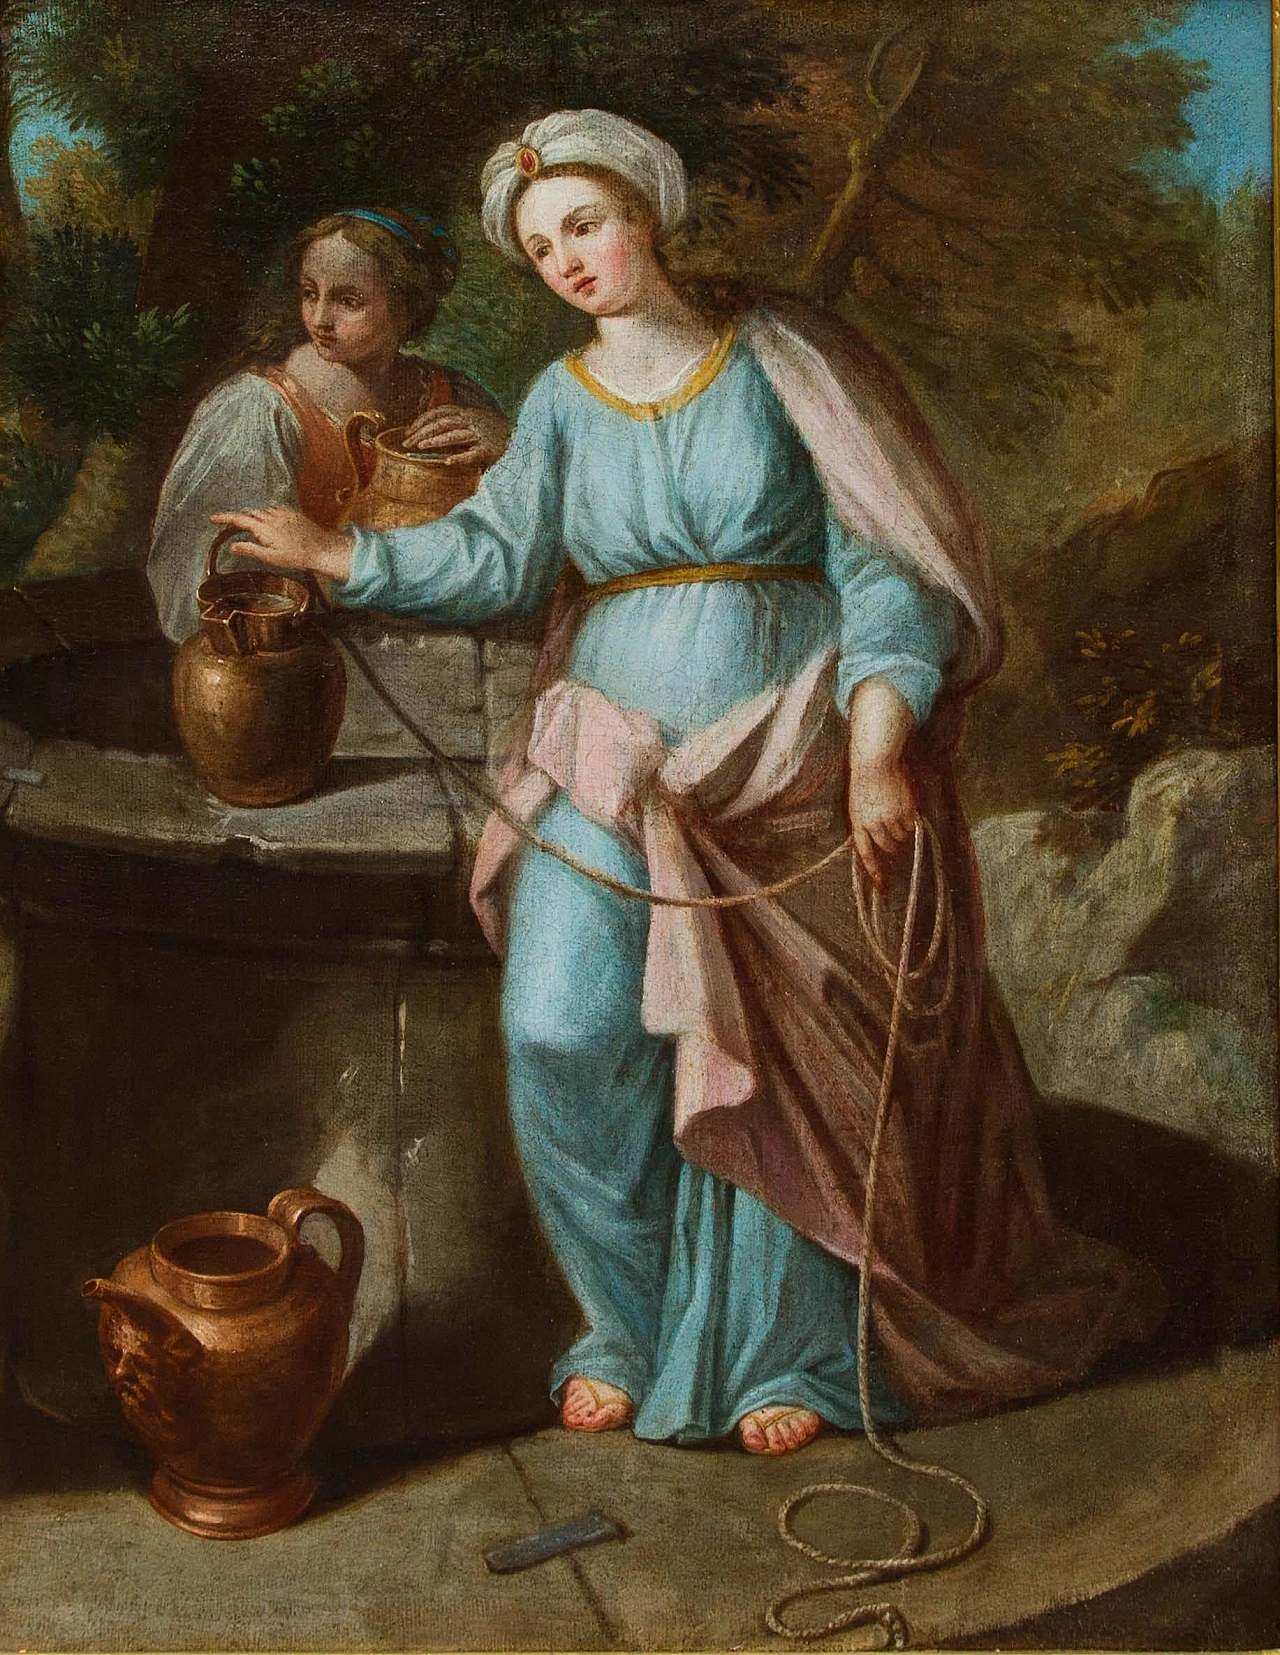 Emilian school, Rebecca at the well, oil on canvas, 17th century 2